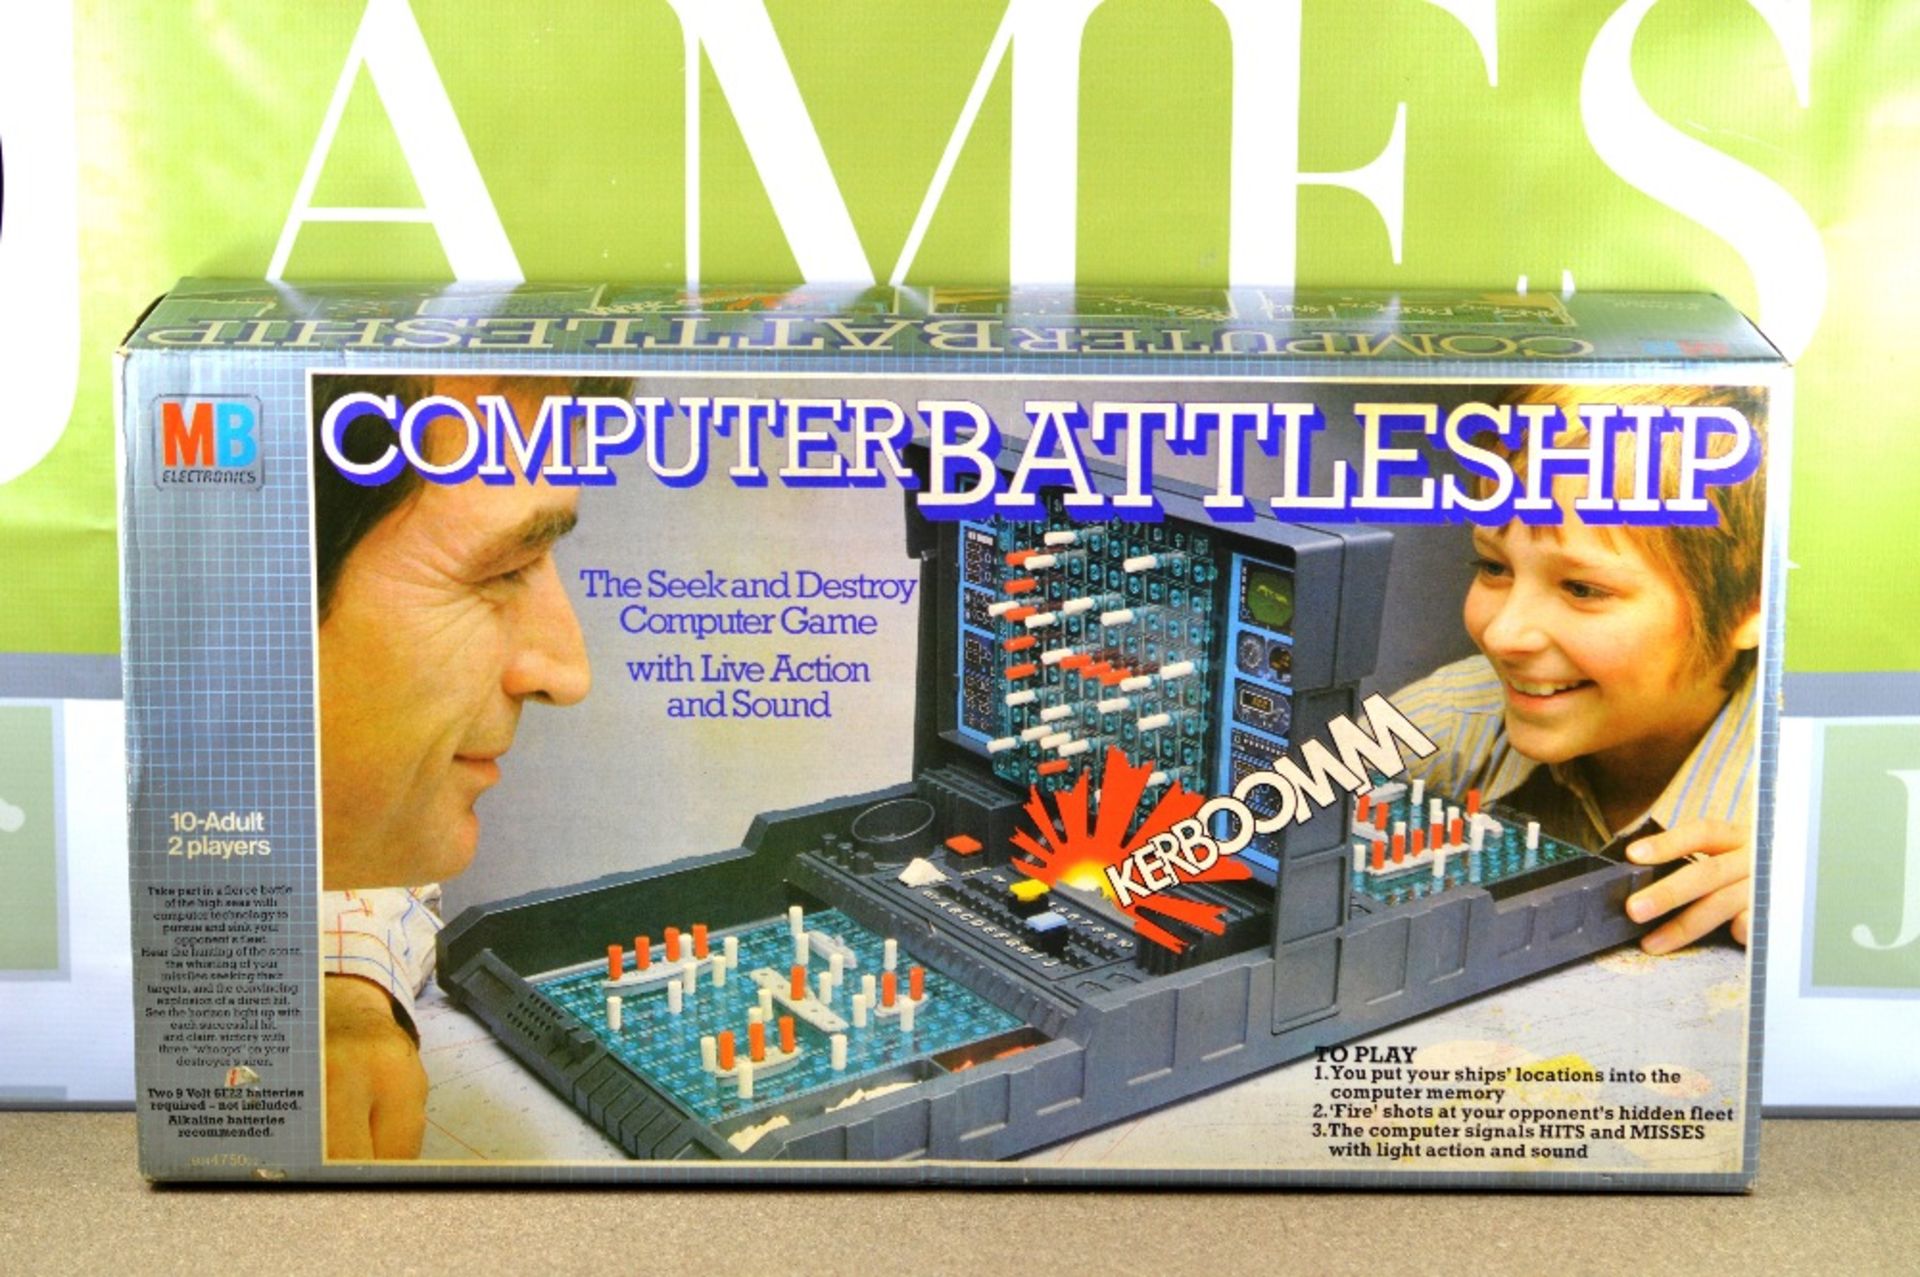 Vintage Computer Battleships game from 1977 by Milton Bradley (MB Electronics)